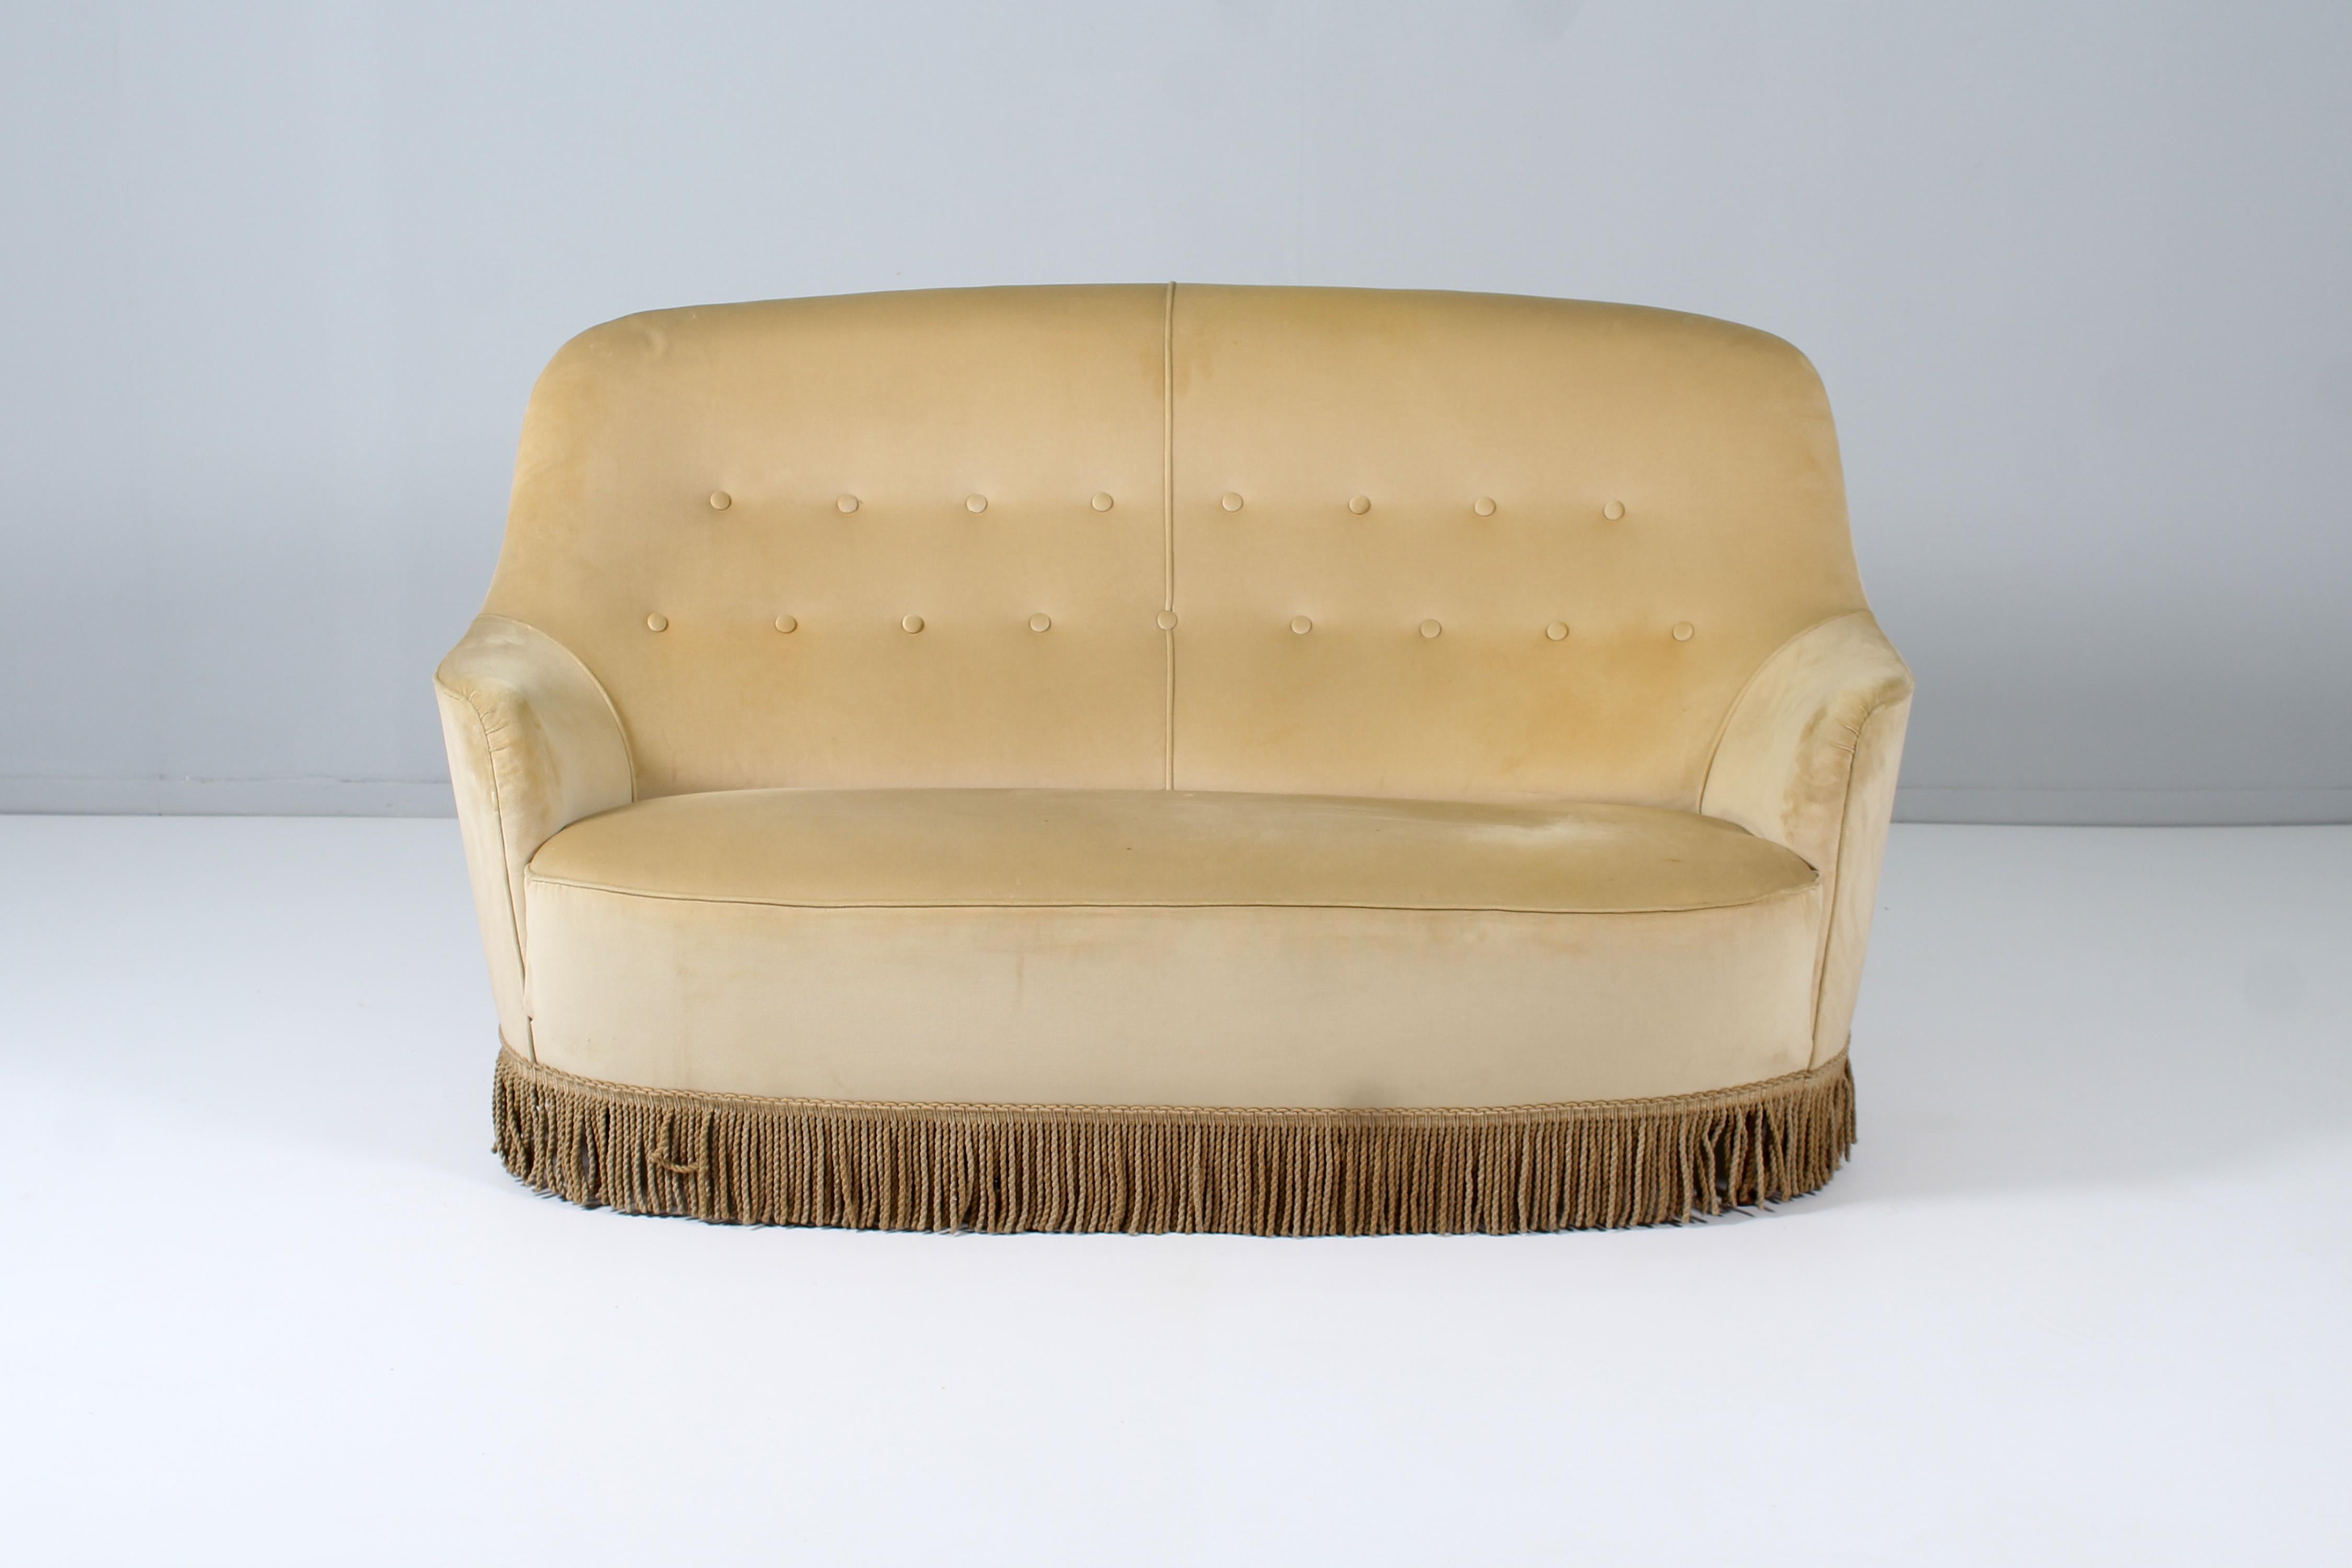 Very elegant two-seat sofa with wooden structure and padding lined in light beige smooth velvet. In the style of Giò Ponti, italian manifacture from the 1950s.
Wear consistent with age and use